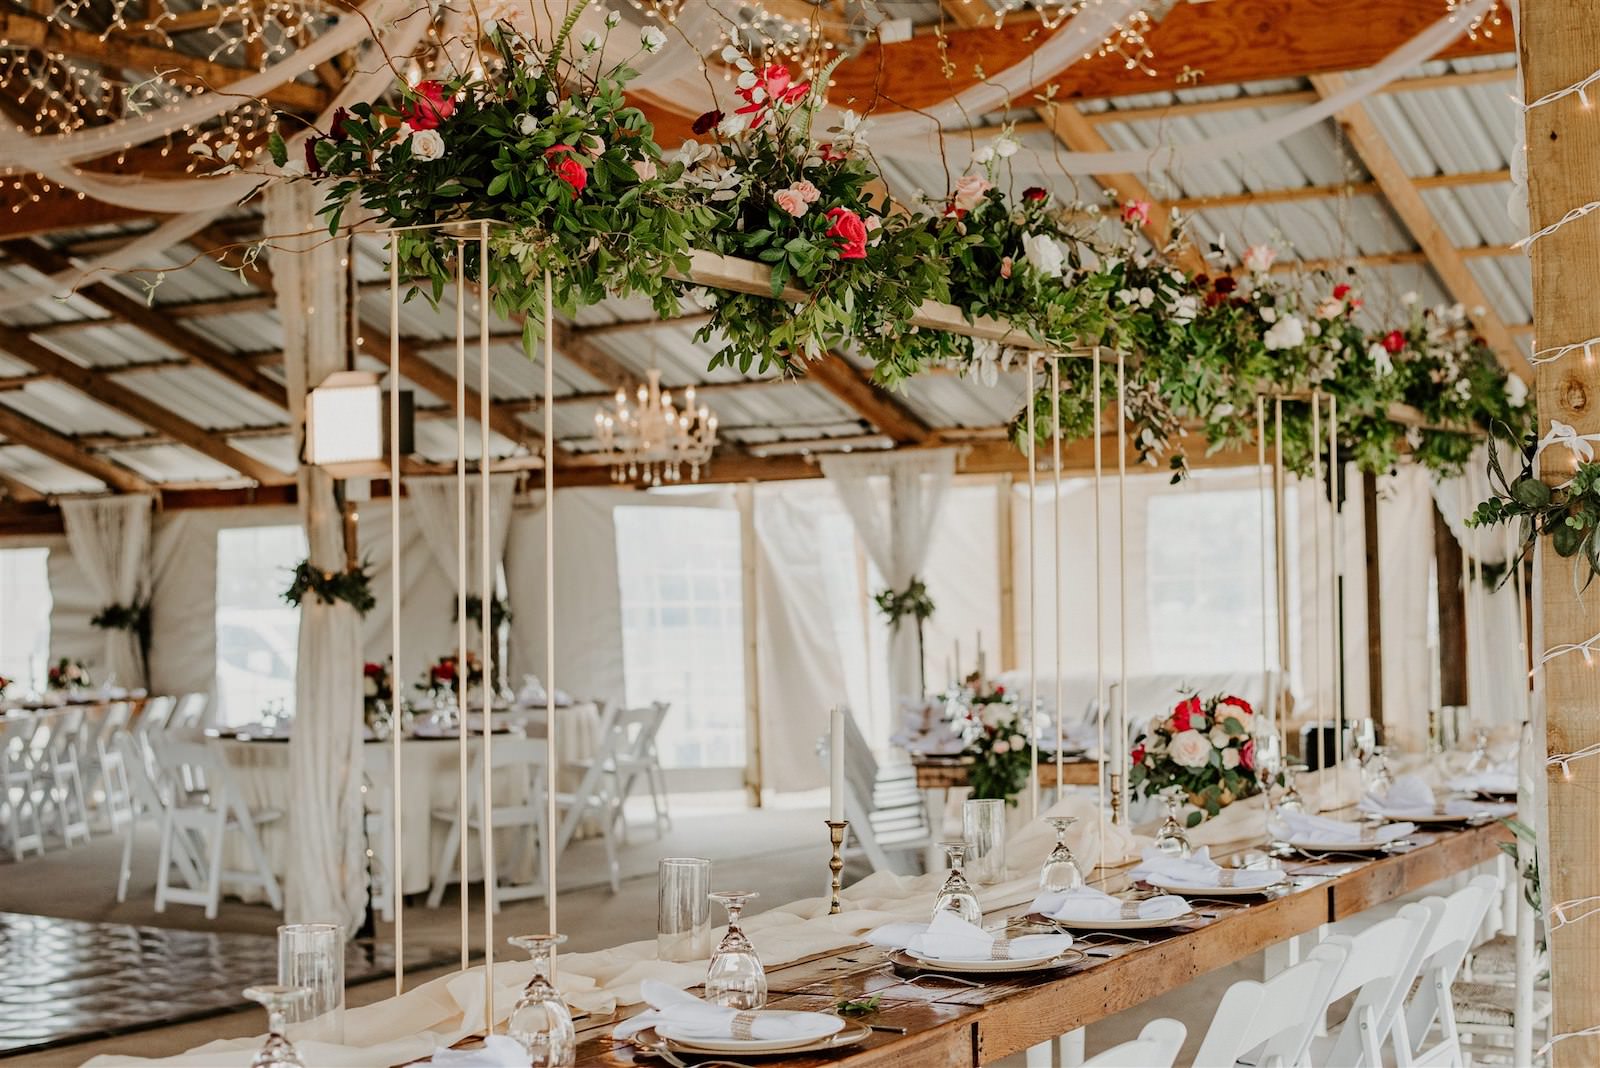 Rustic Barn Tampa Wedding with Suspended Ceiling Floral Arrangements with Blush Pink and Deep Red Burgundy Roses and Greenery | Wood Farm Tables with Champagne Linen Runners and Taper Candlestick Candles | Tampa Wedding Florist Monarch Events and Designs